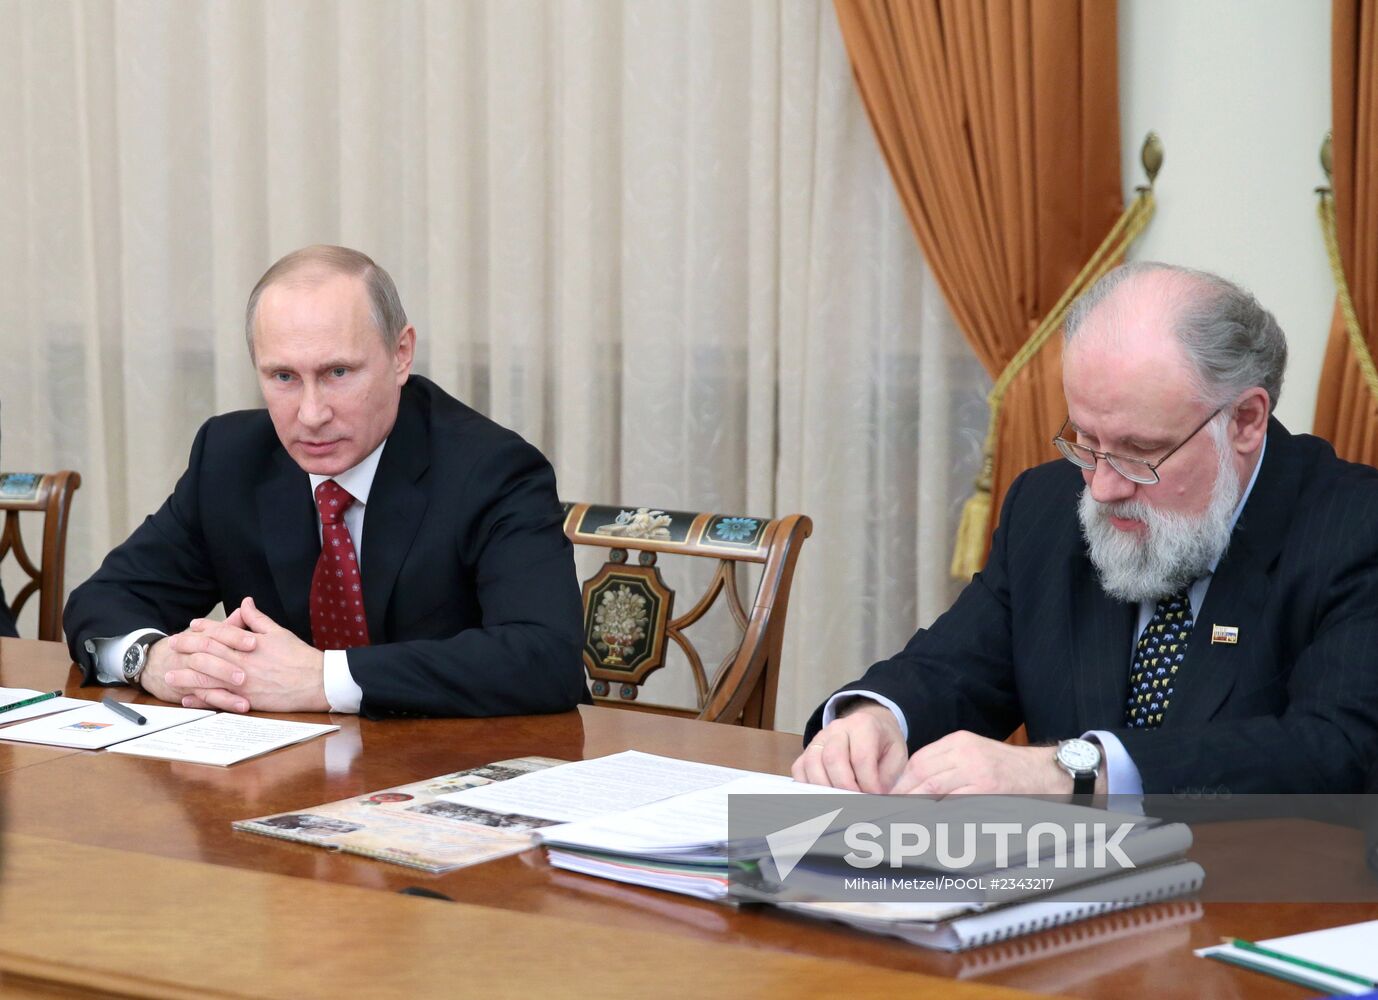 Vladimir Putin conducts meeting with electoral commission bosses